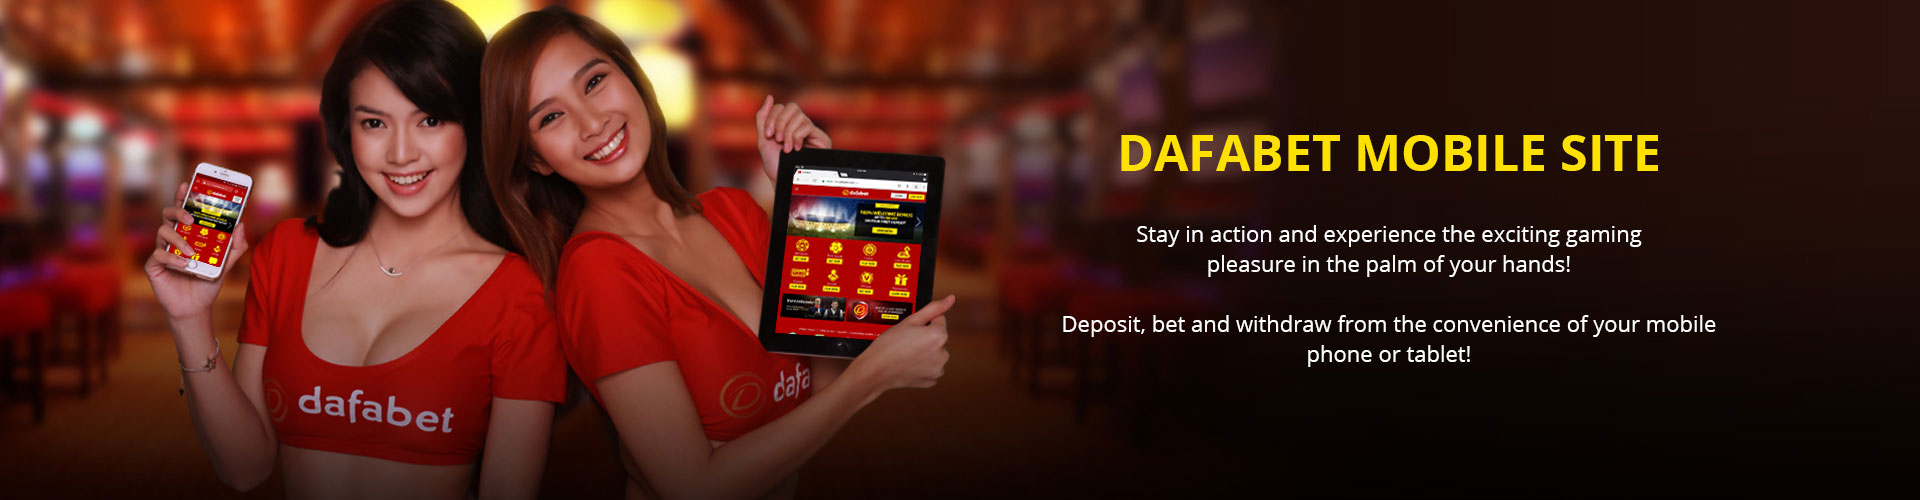 dafabet mobile betting station